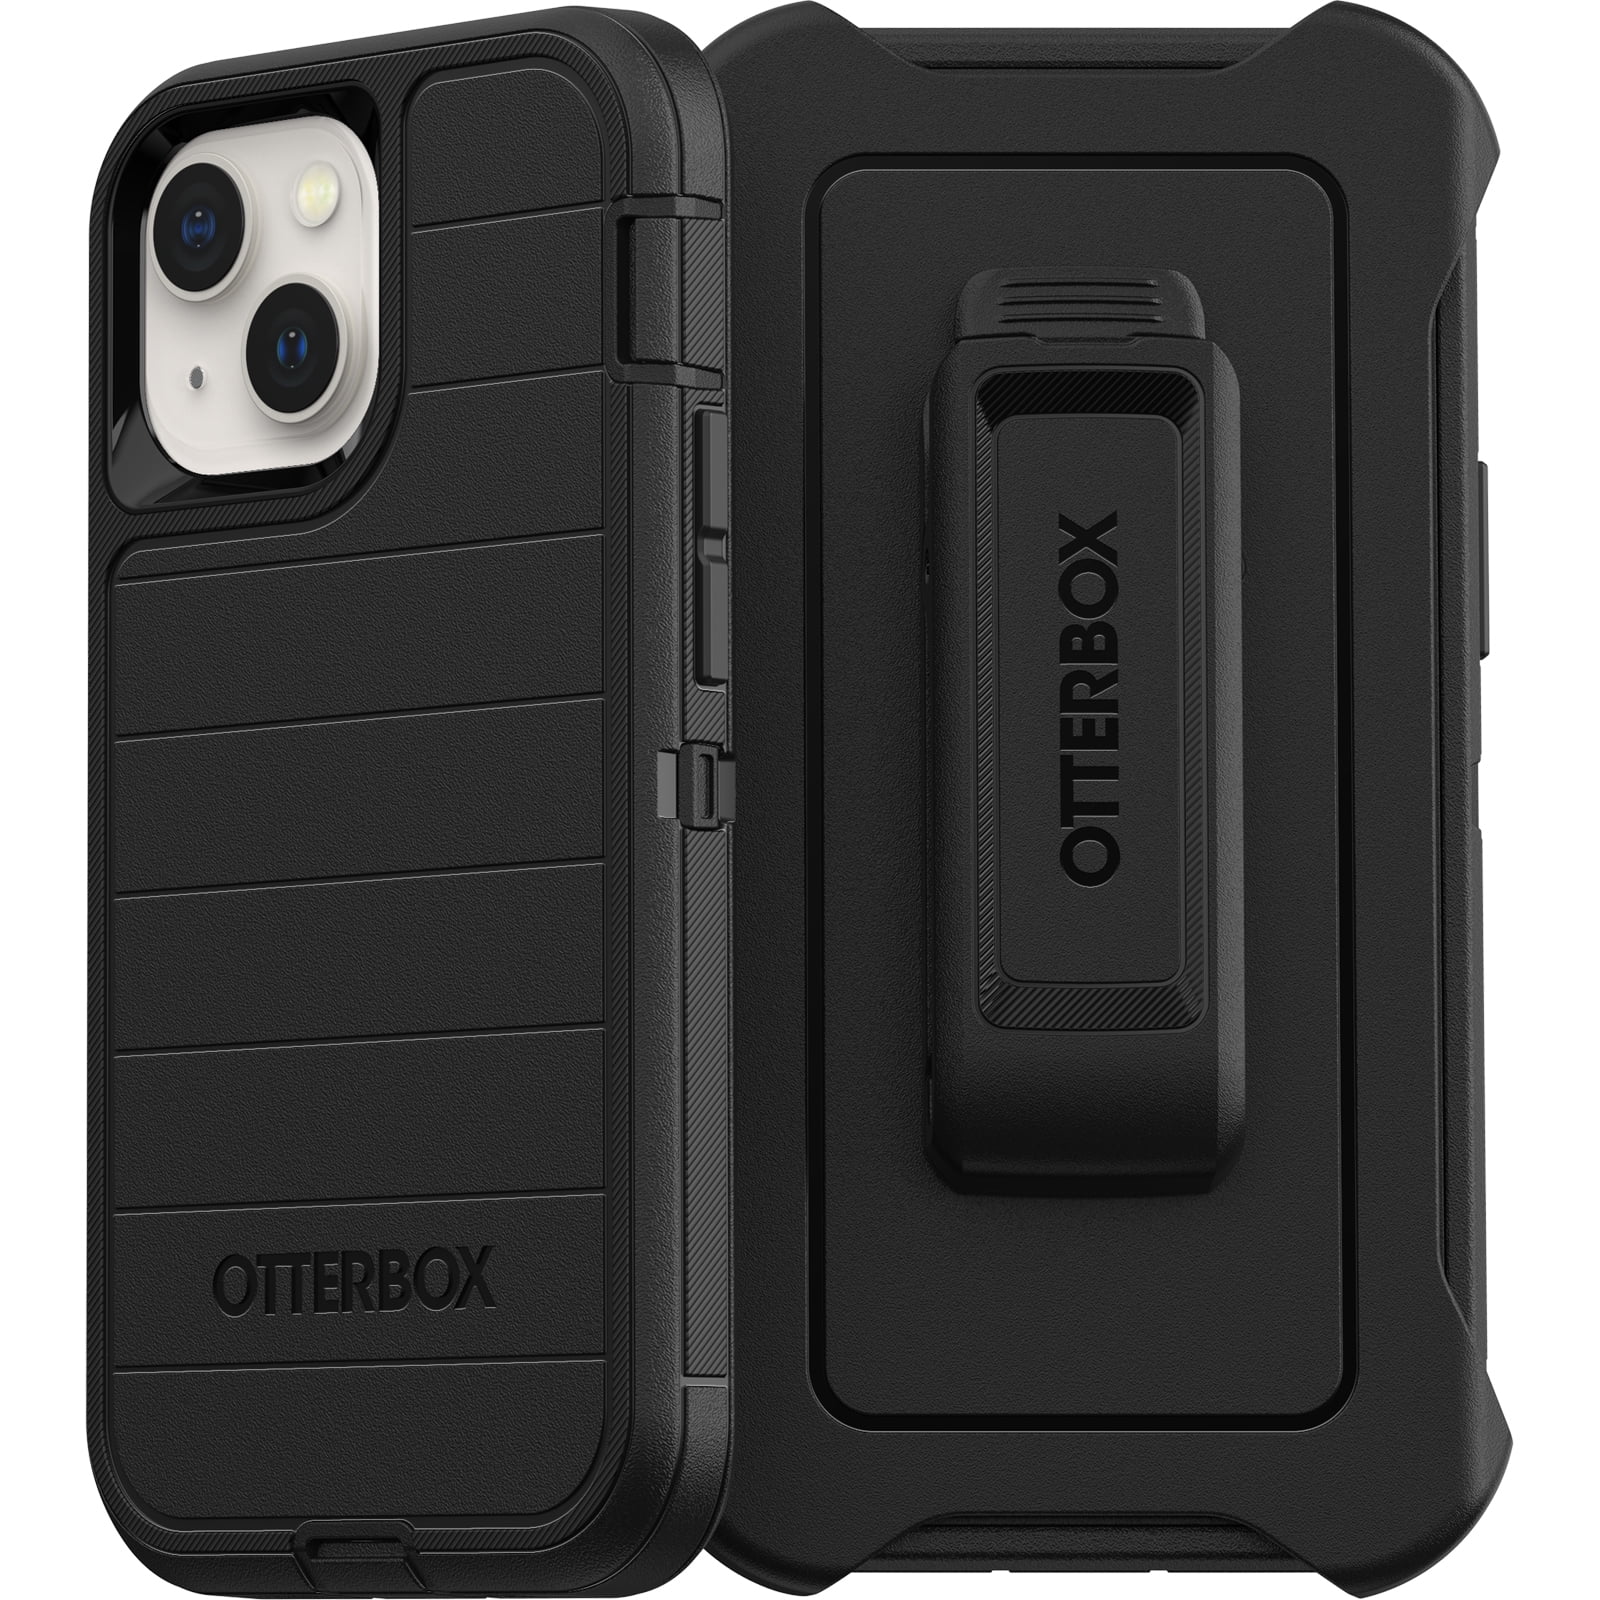  OtterBox iPhone 13 mini & iPhone 12 mini Prefix Series Case -  BLACK CRYSTAL, ultra-thin, pocket-friendly, raised edges protect camera &  screen, wireless charging compatible : Cell Phones & Accessories